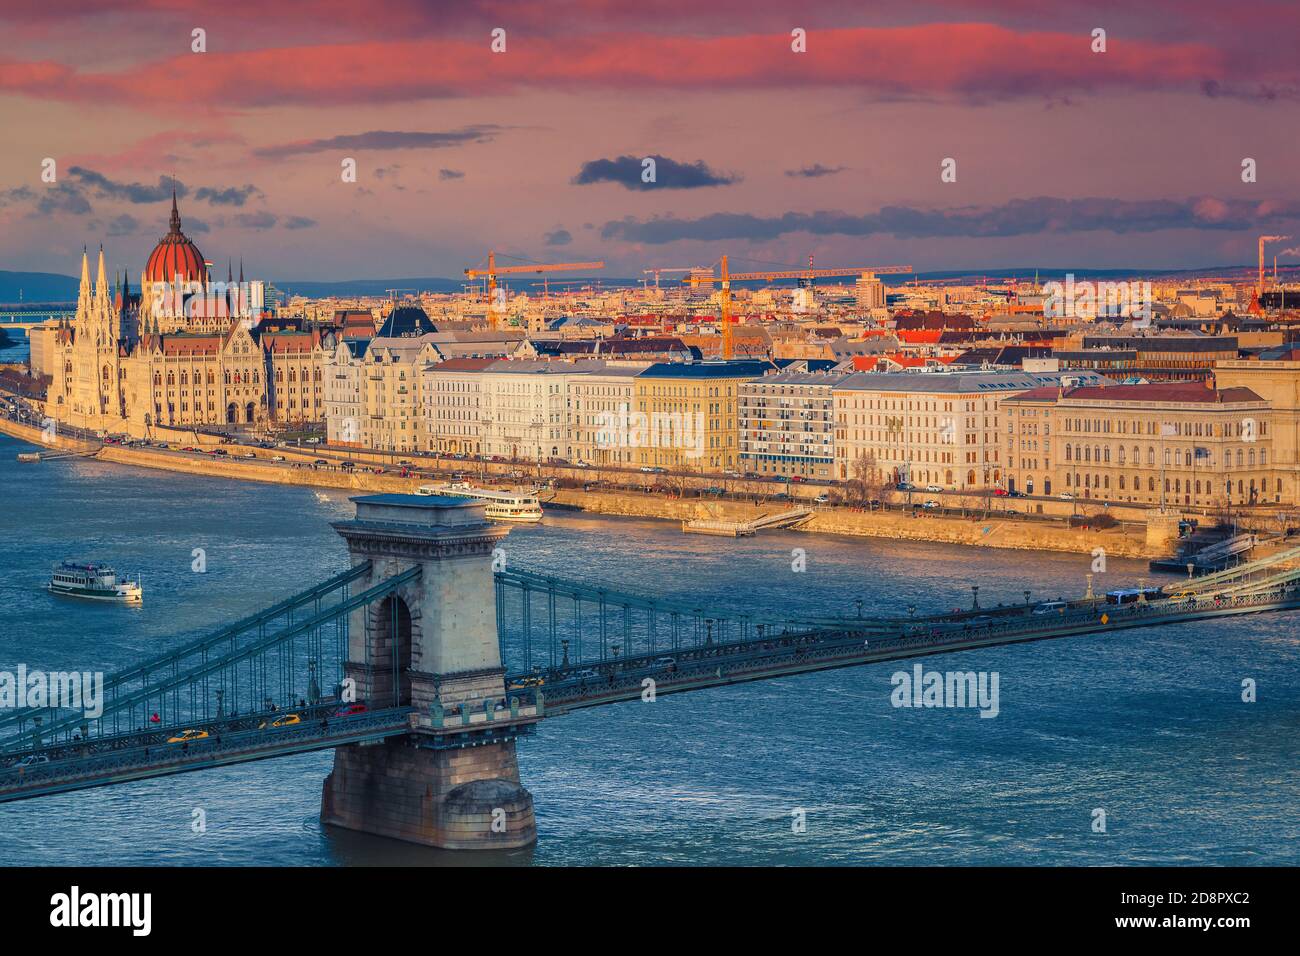 Amazing view from the Buda castle with Chain bridge over the Danube river and famous parliament building, Budapest, Hungary, Europe Stock Photo